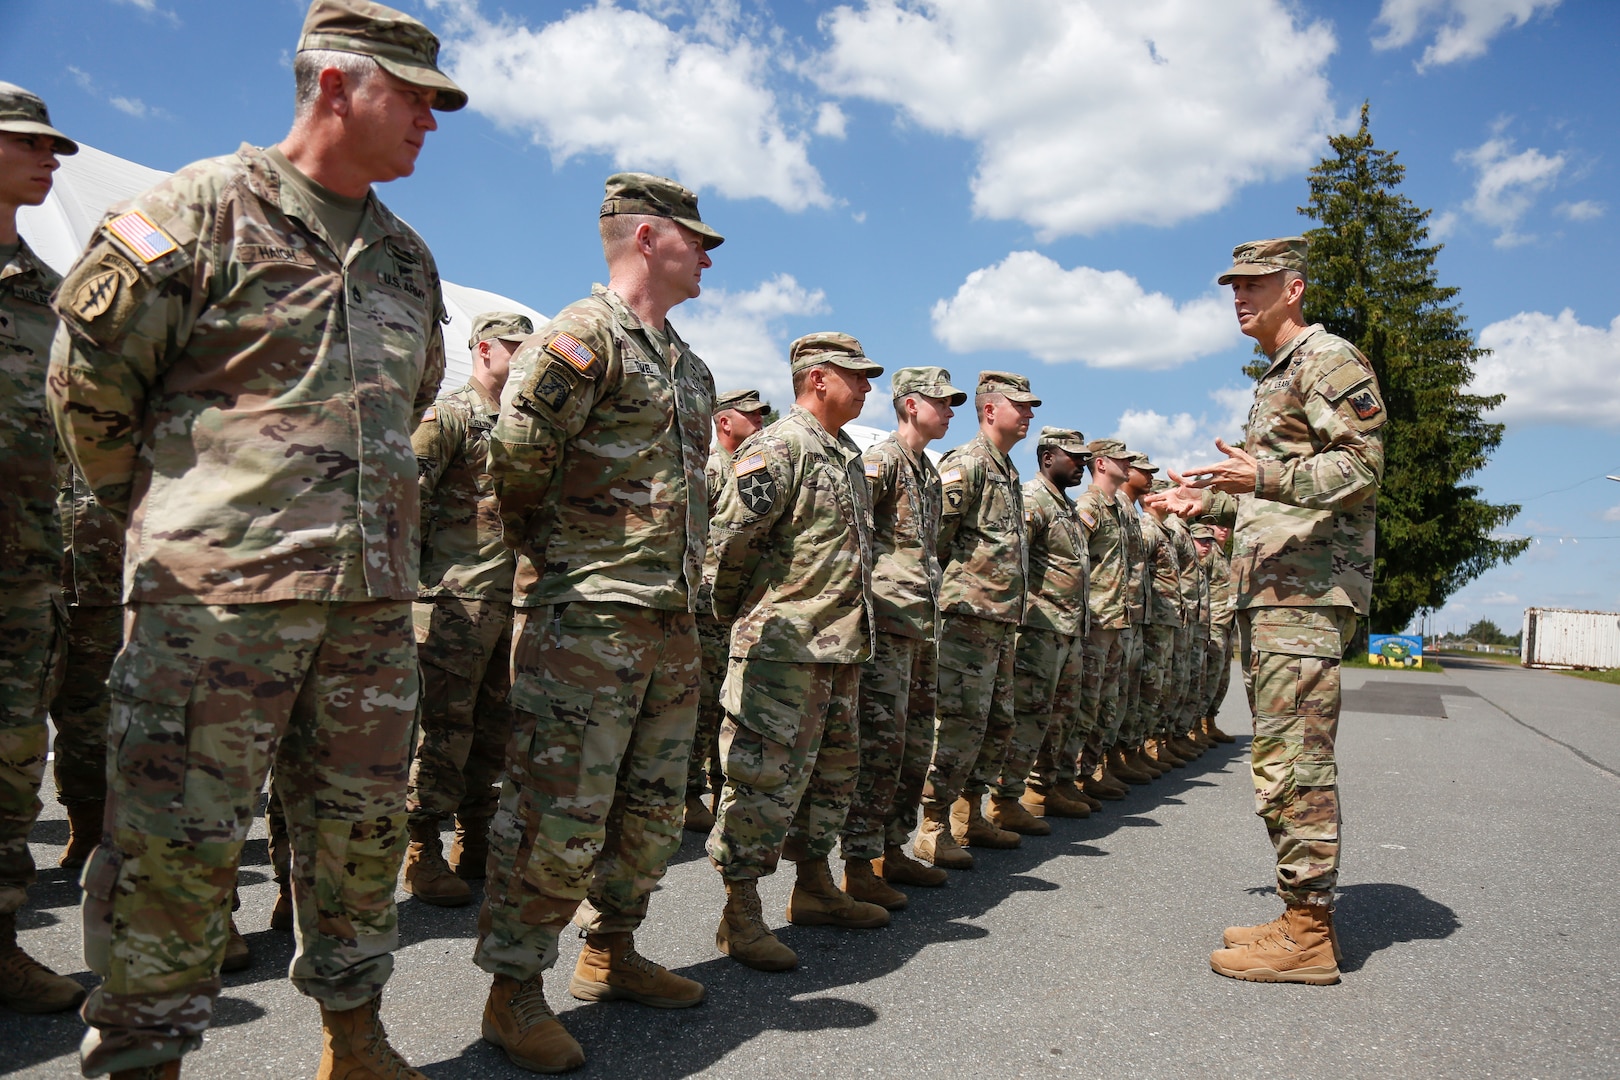 Army Gen. Daniel Hokanson, chief, National Guard Bureau, talks with a formation of Soldiers with the 53rd Infantry Brigade Combat Team, Florida National Guard, in Grafenwoehr, Germany, June 12, 2022. Germany was Hokanson’s second stop on a five-nation trip to recognize and strengthen National Guard relationships with European allies and partners.